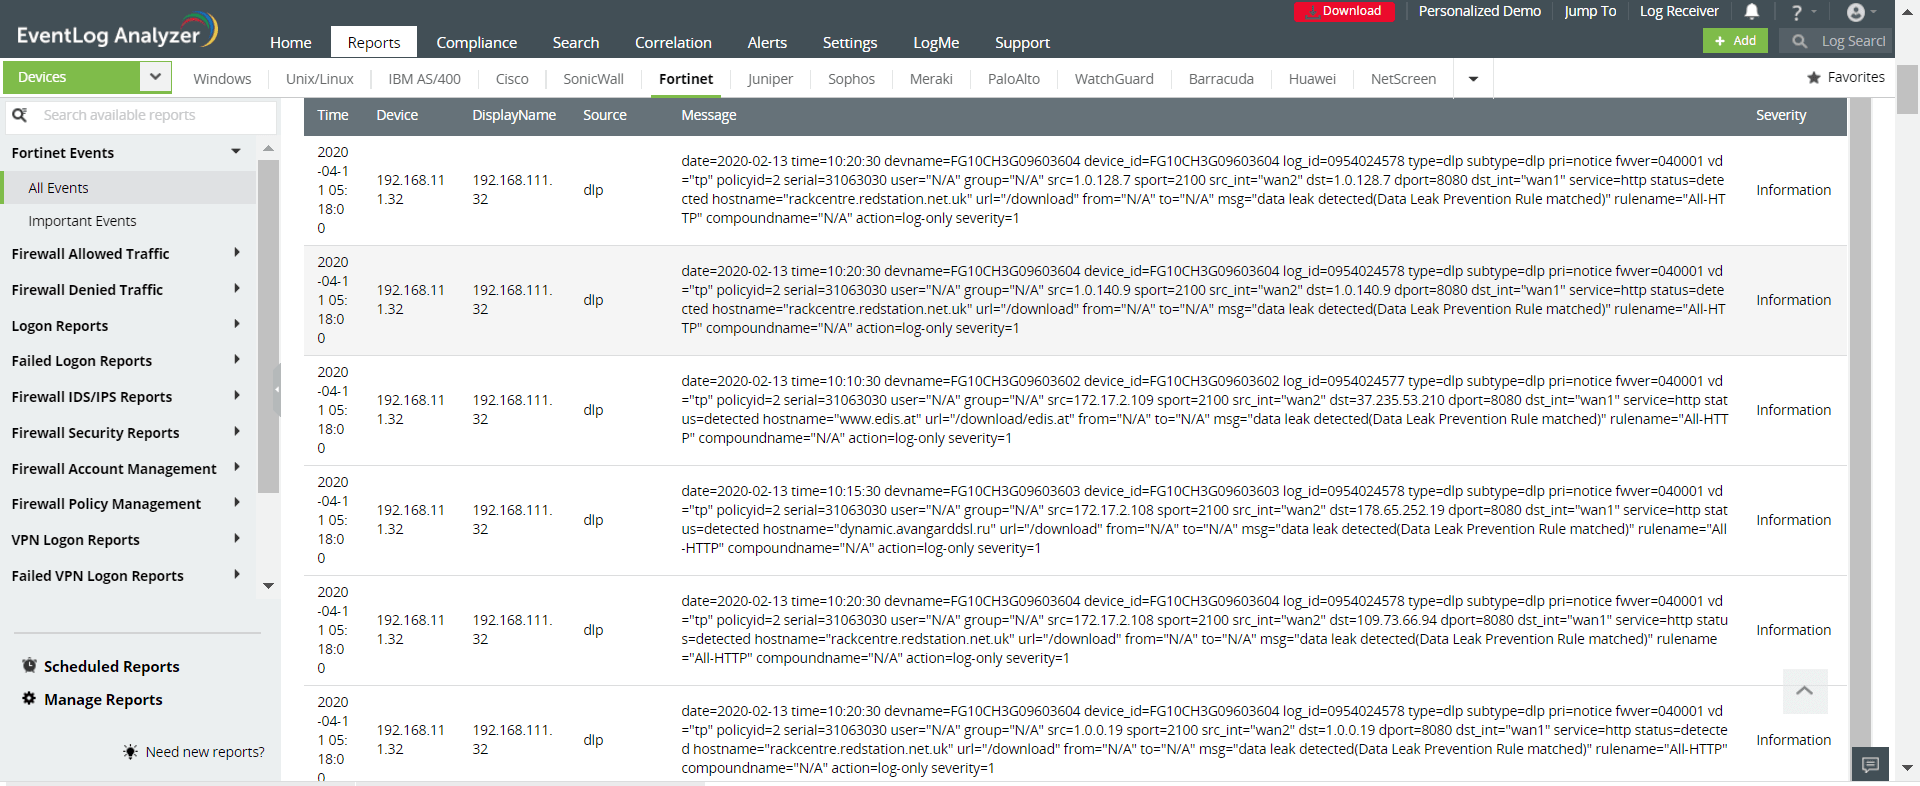 Reports for Fortinet Devices